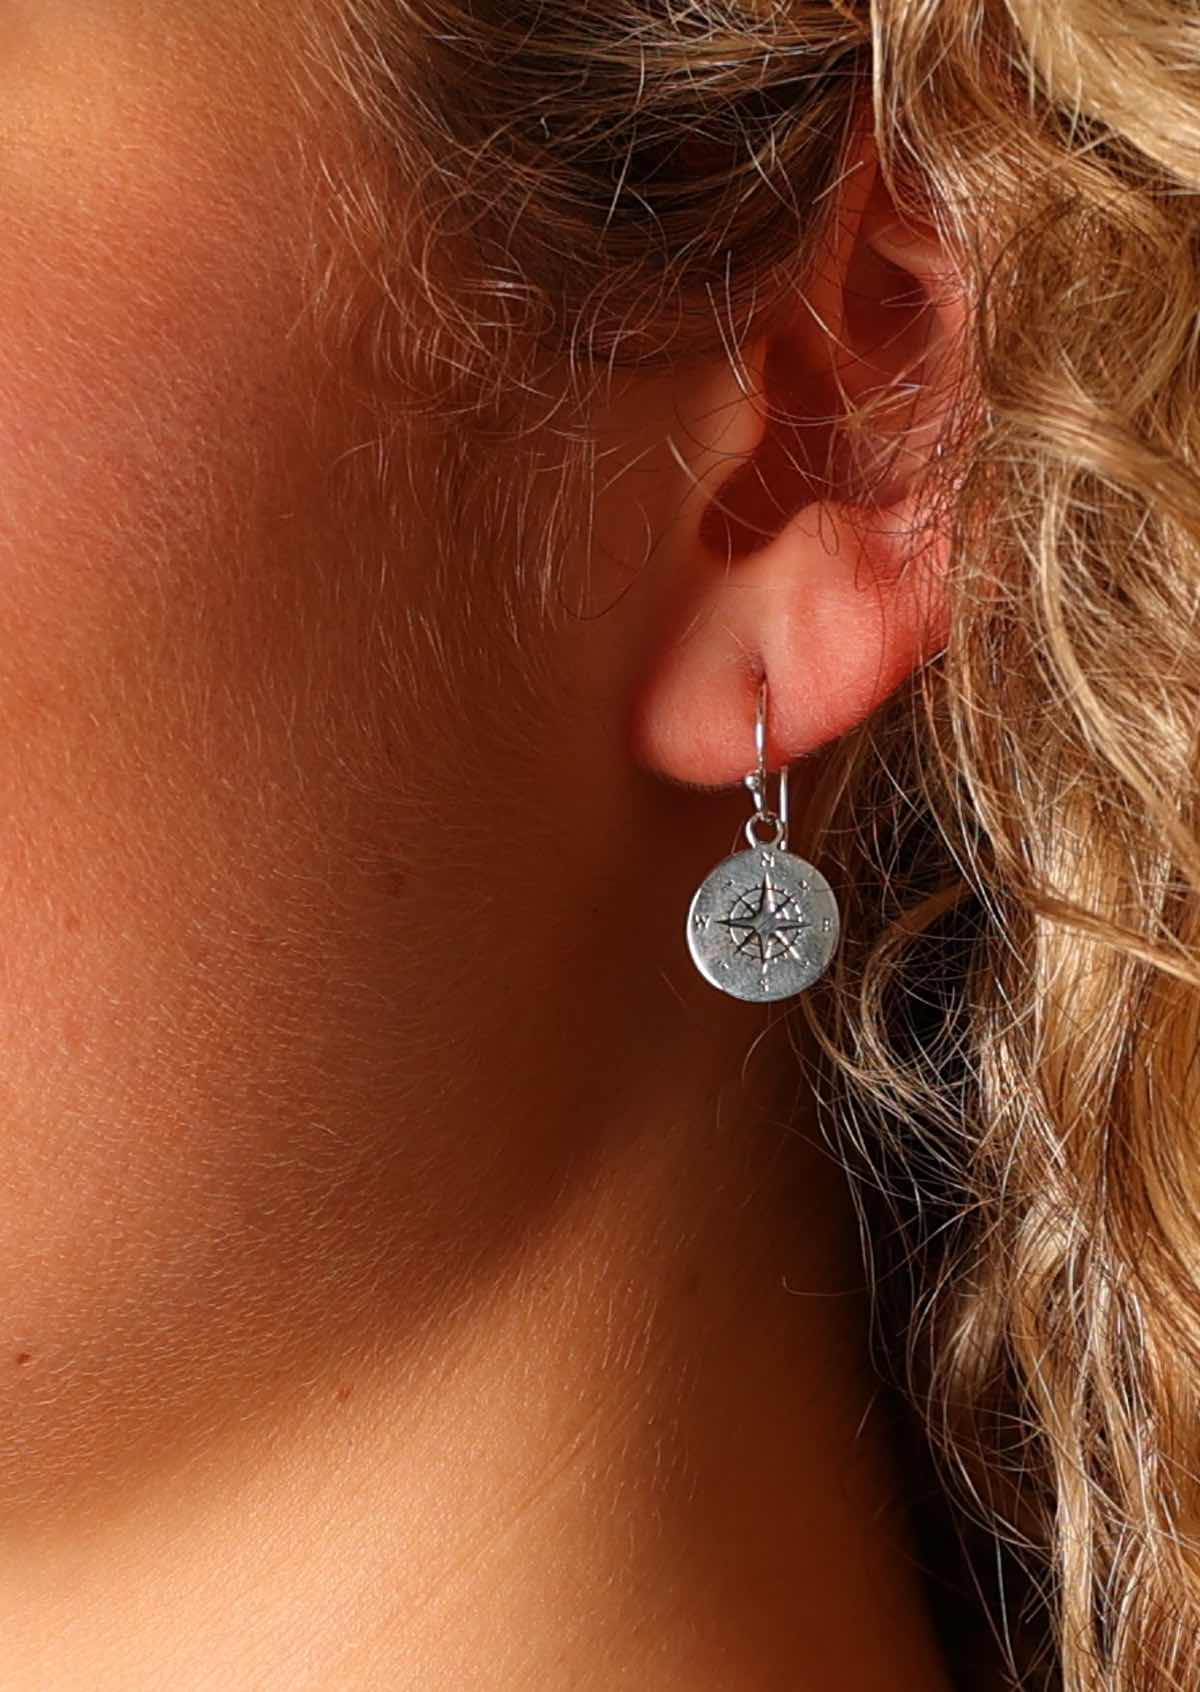 Let these Karma Compass earrings help give you some direction